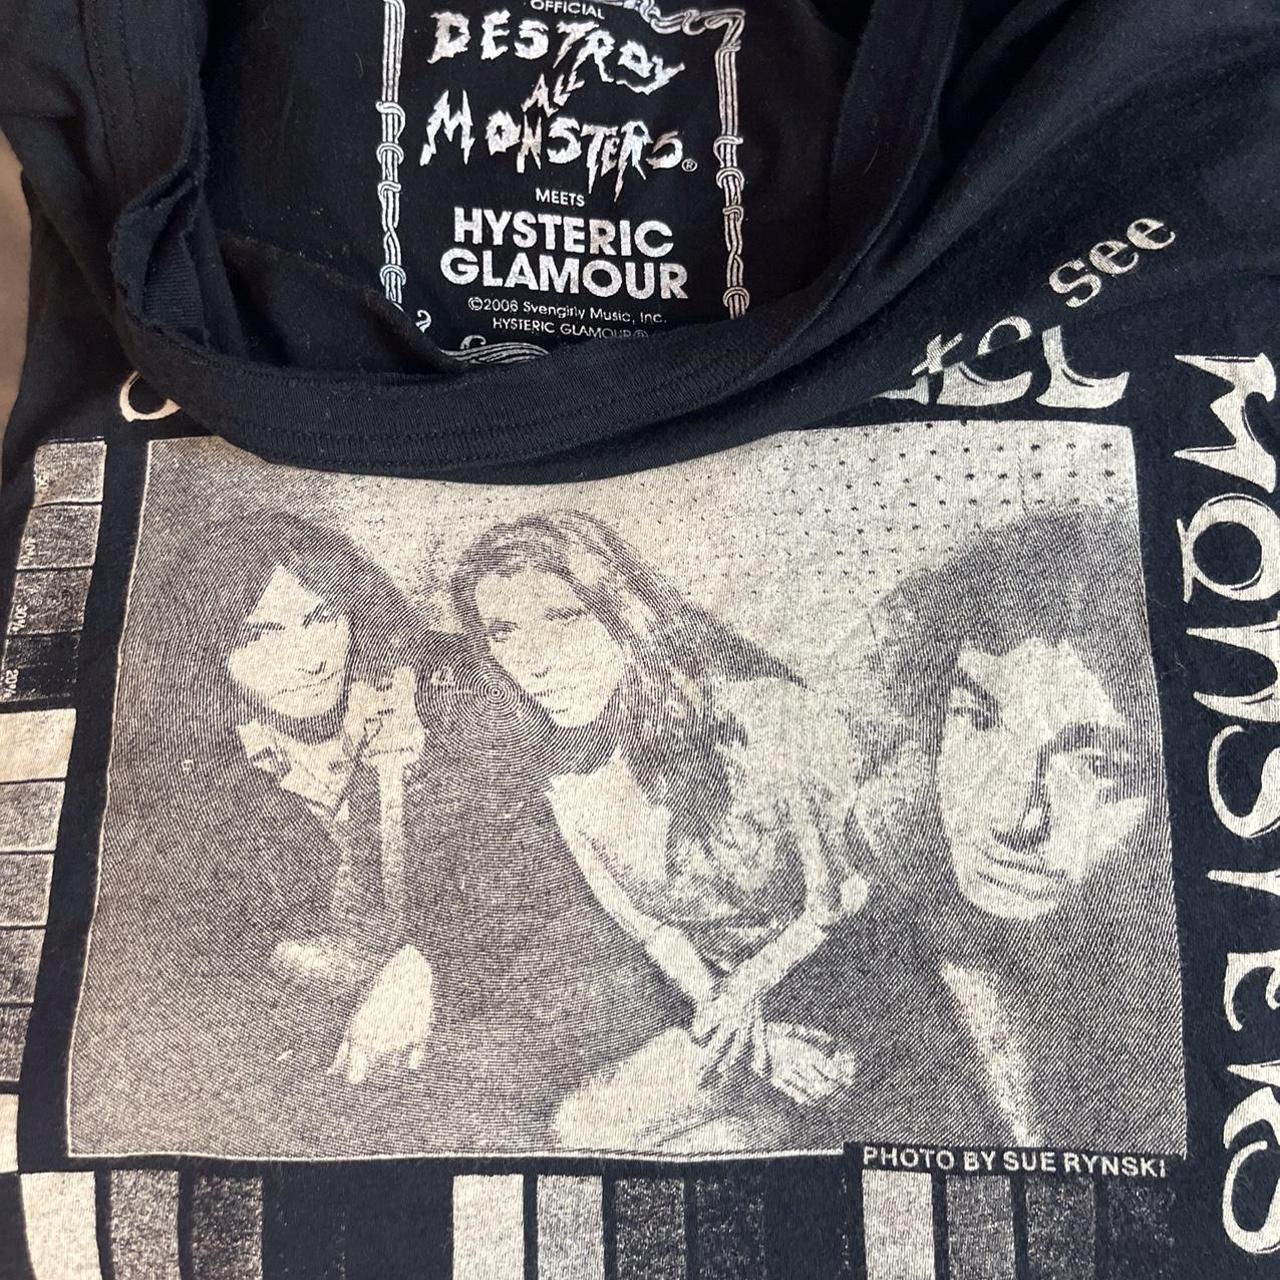 Hysteric glamour x destroy all monsters collaborate....